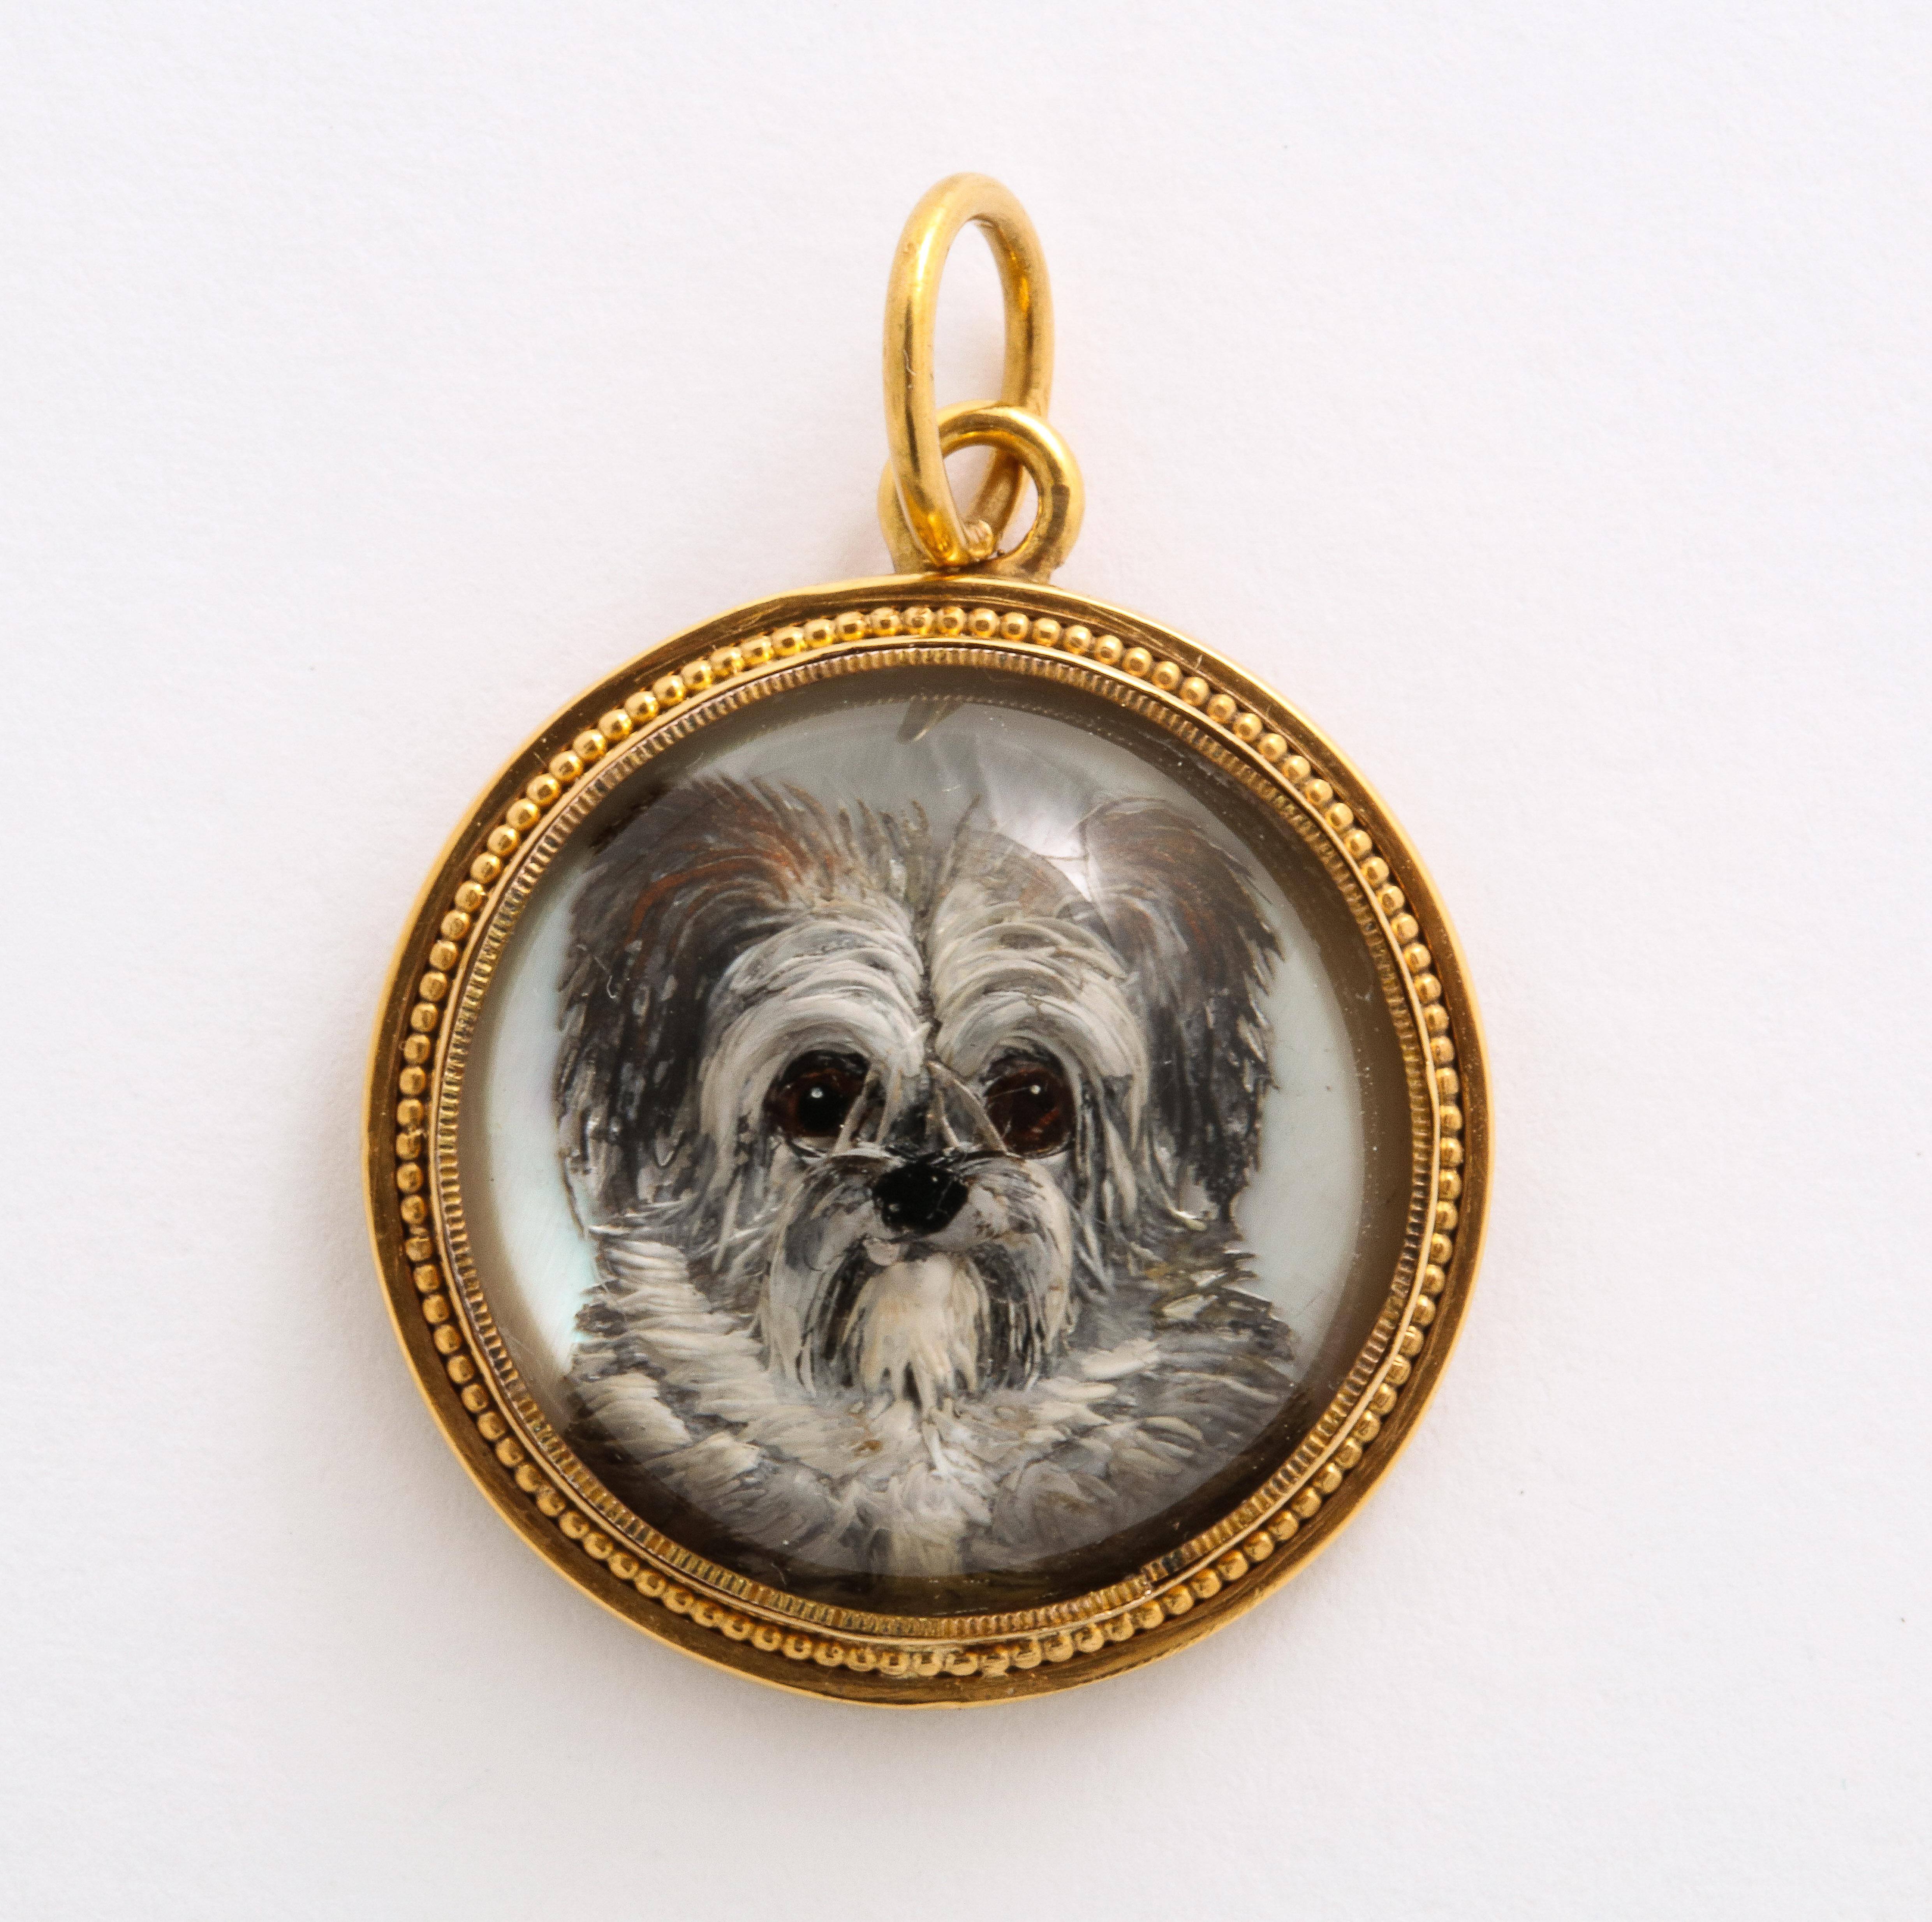 Just look at the face on this pendant of a precious Essex crystal terrier pup set in gold and you will want to hug it. The dogs big round eyes beg your attention. The dog seems to jump from its containment. Essex crystal or reverse crystal intaglio,